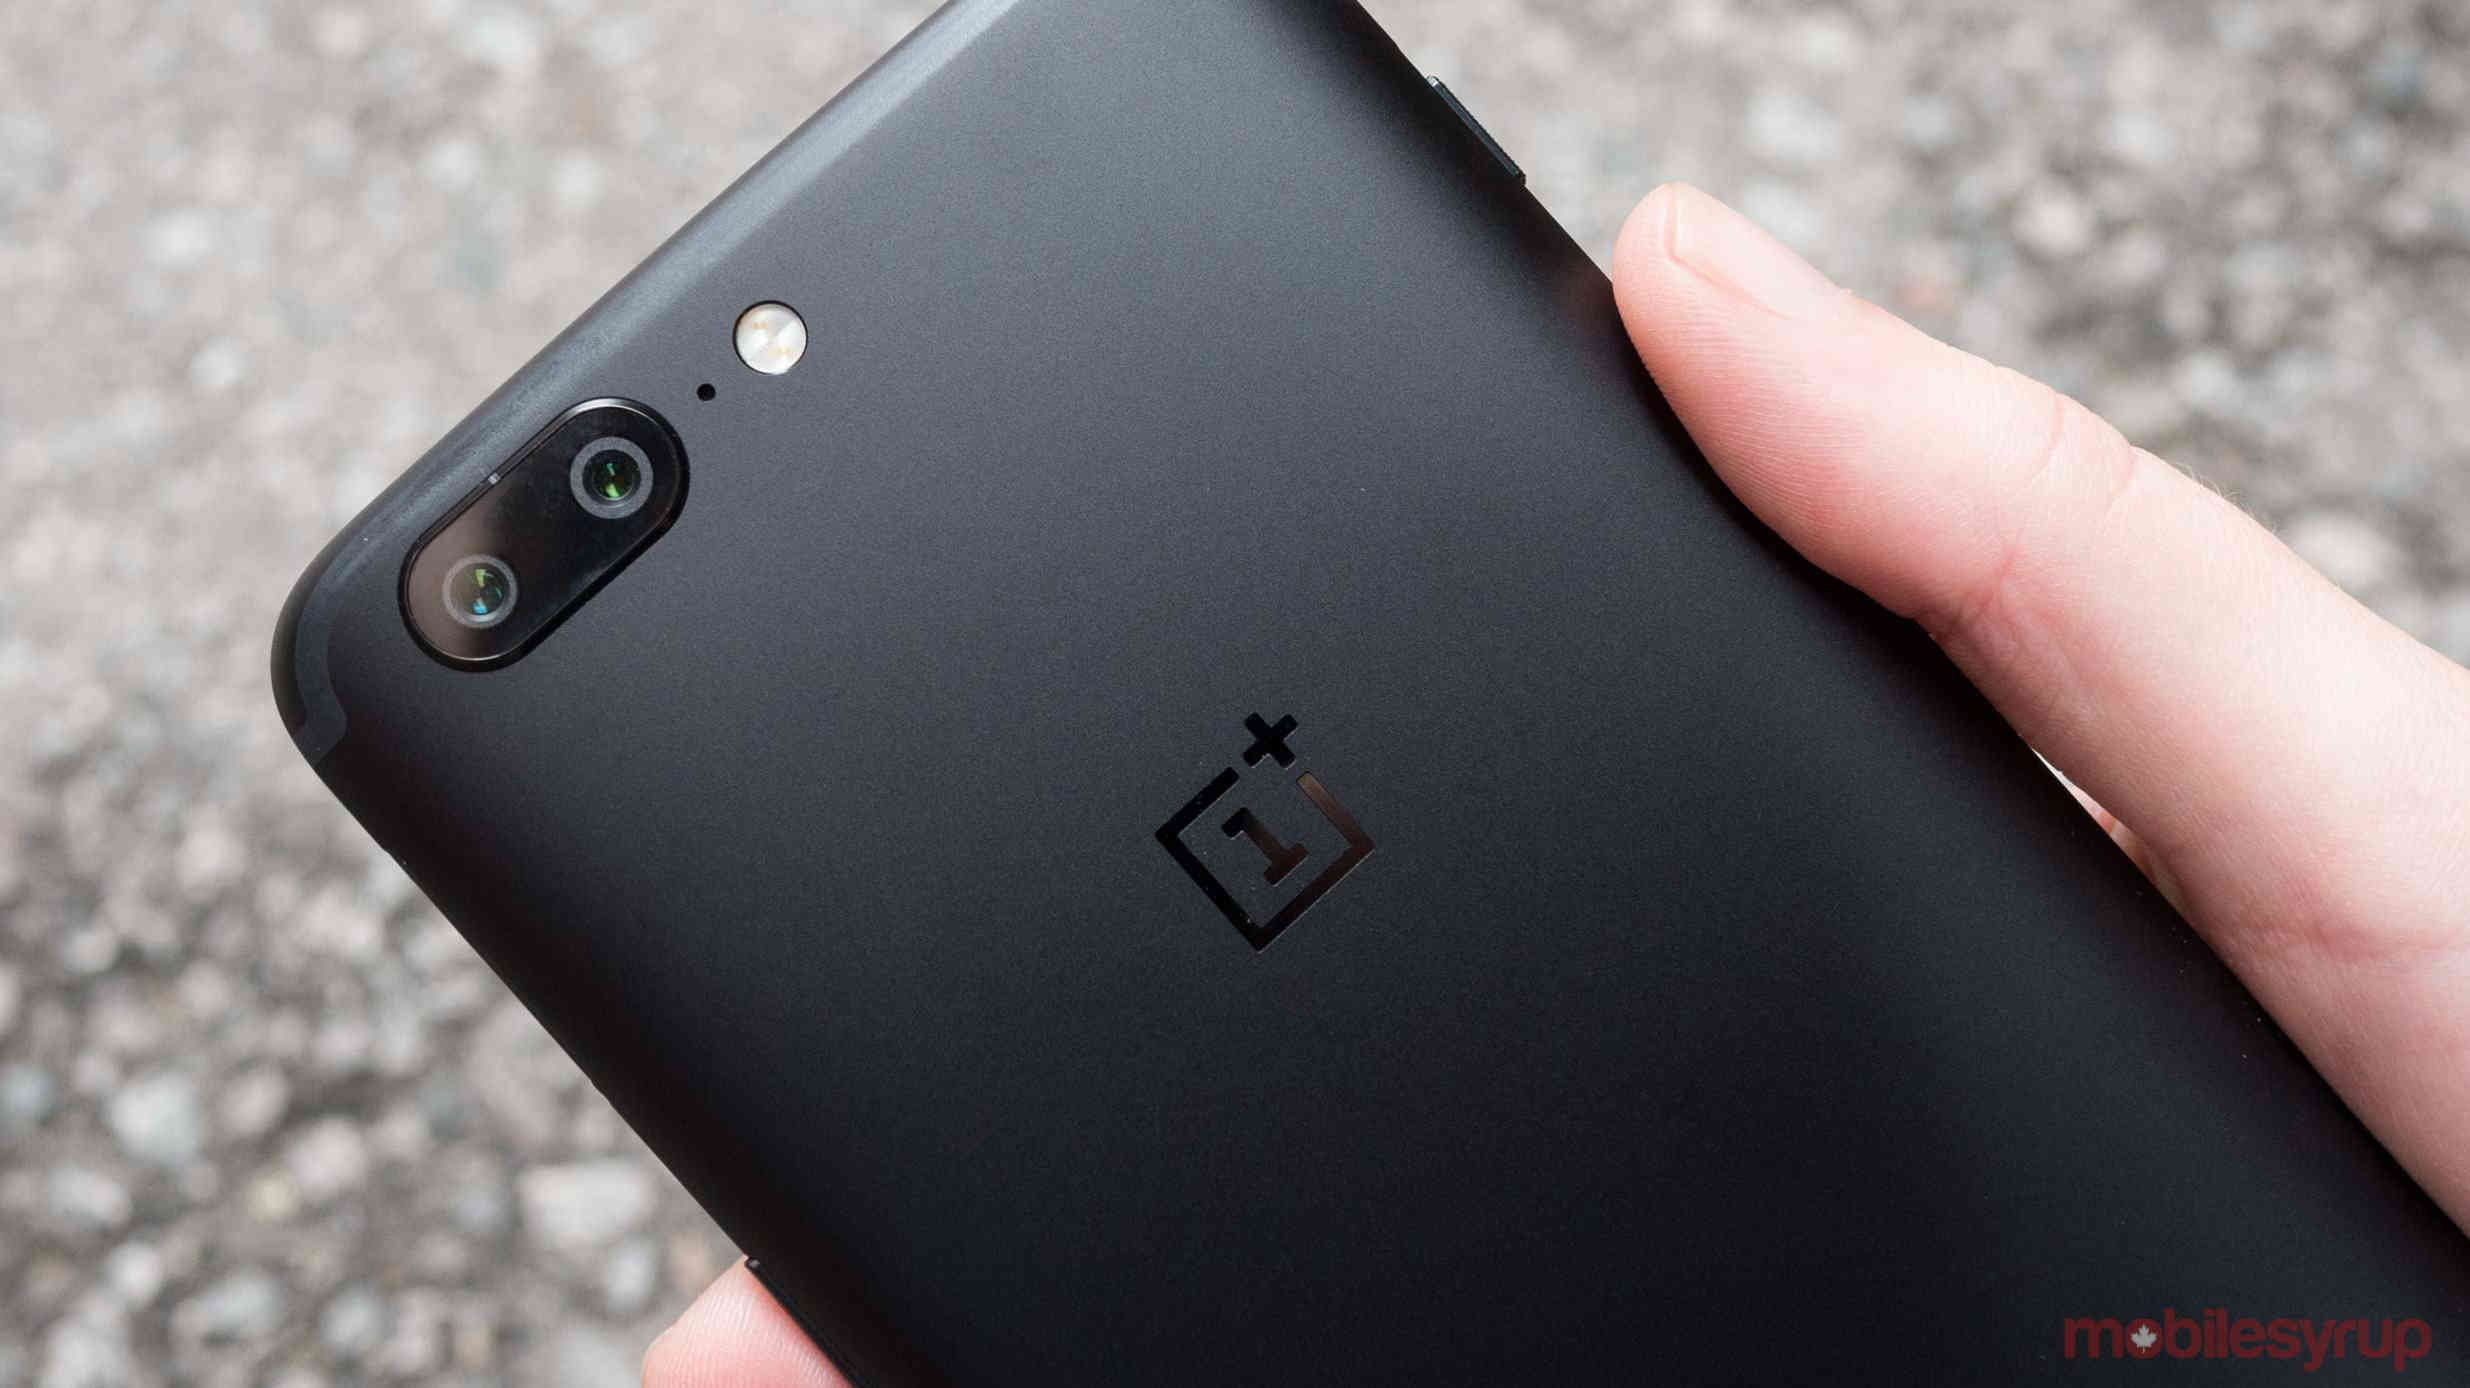 If you want your OnePlus to be more like an iPhone, then this is for you